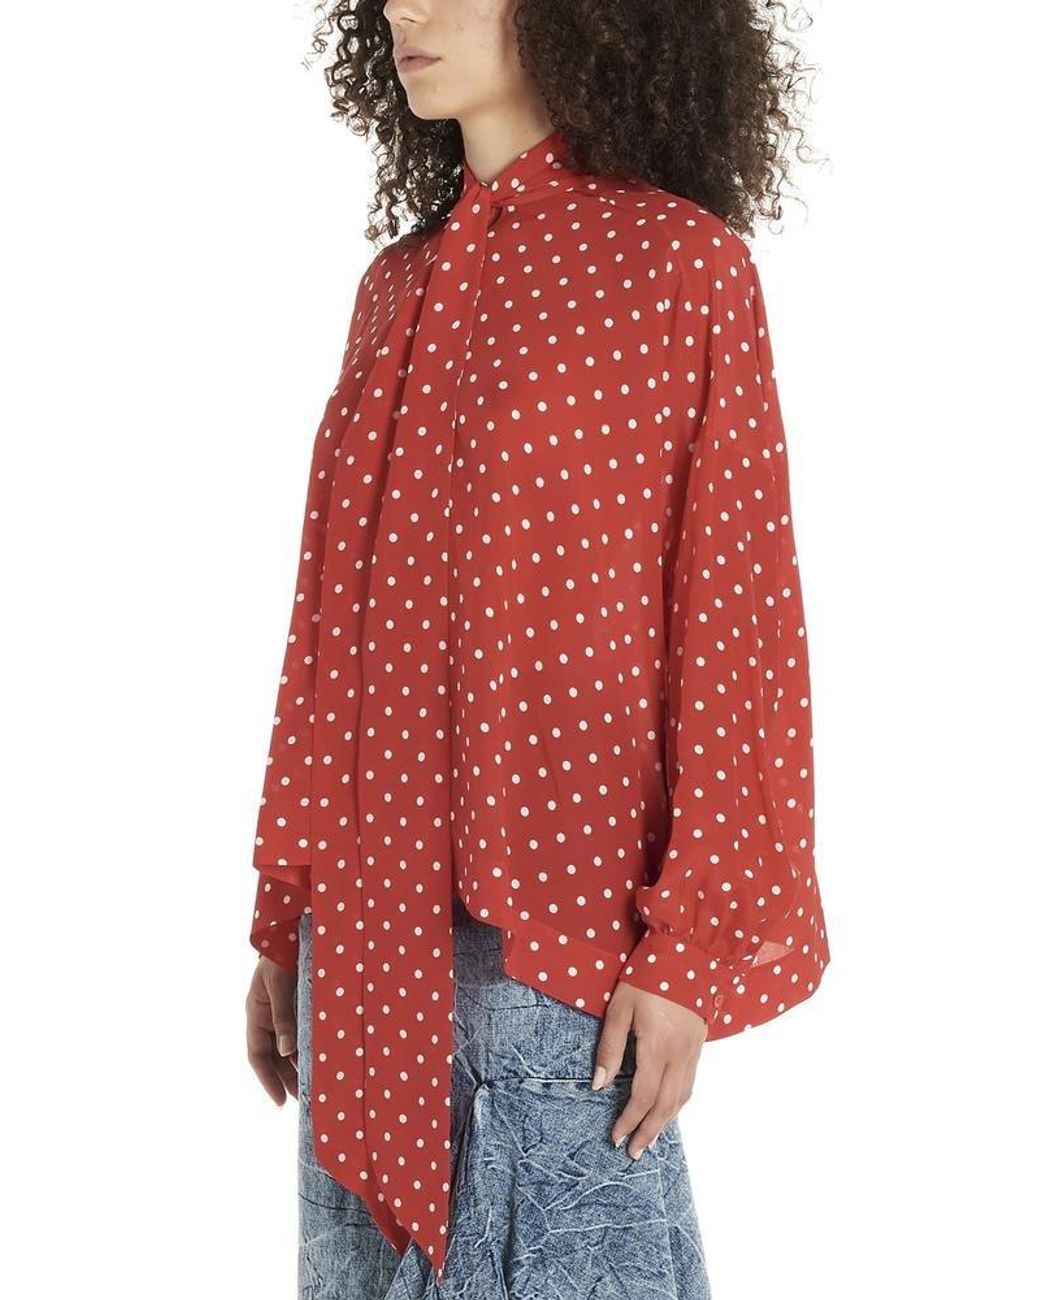 Balenciaga Polka-dot Pussybow Bluse in Red | Lyst